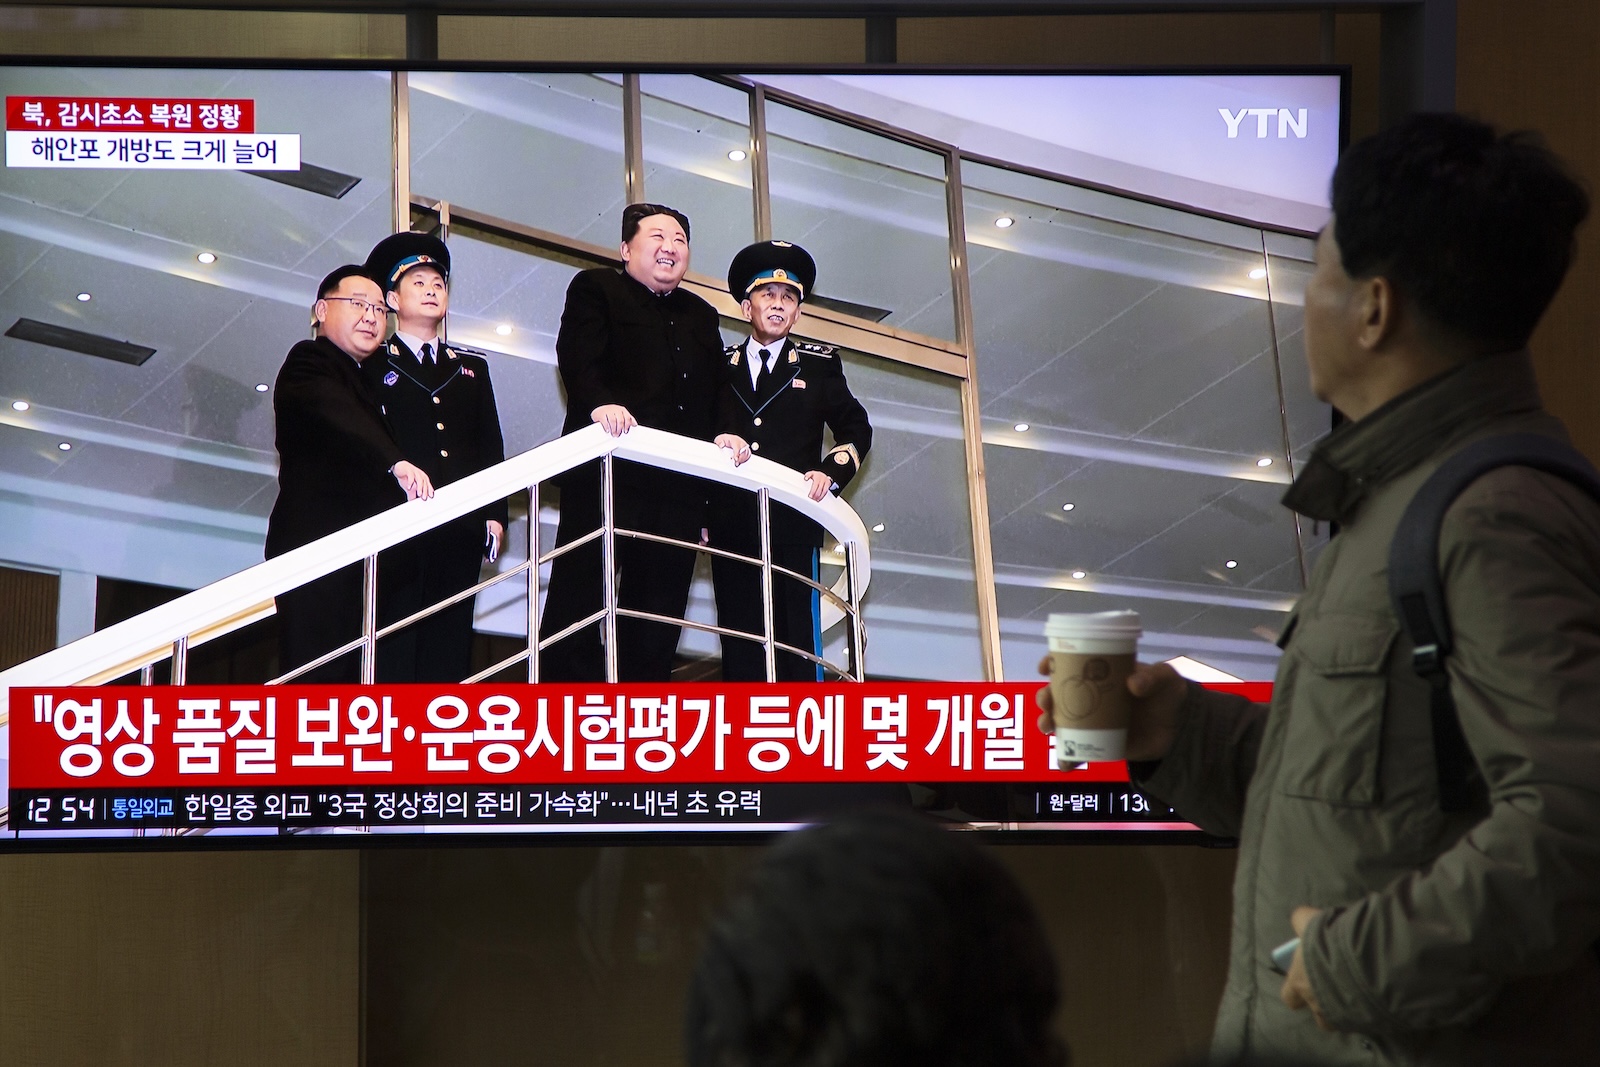 epa10997121 People watch as North Korean Leader Kim Jong Un appears on a TV monitor displaying daily news at a station in Seoul, South Korea, 27 November 2023. According to a statement by South Korean military officials made on 27 November, North Korea deployed troops and equipment to Demilitarized Zone (DMZ) ground posts after the North vowed to resume all military measures halted under a 2018 deal.  EPA/JEON HEON-KYUN